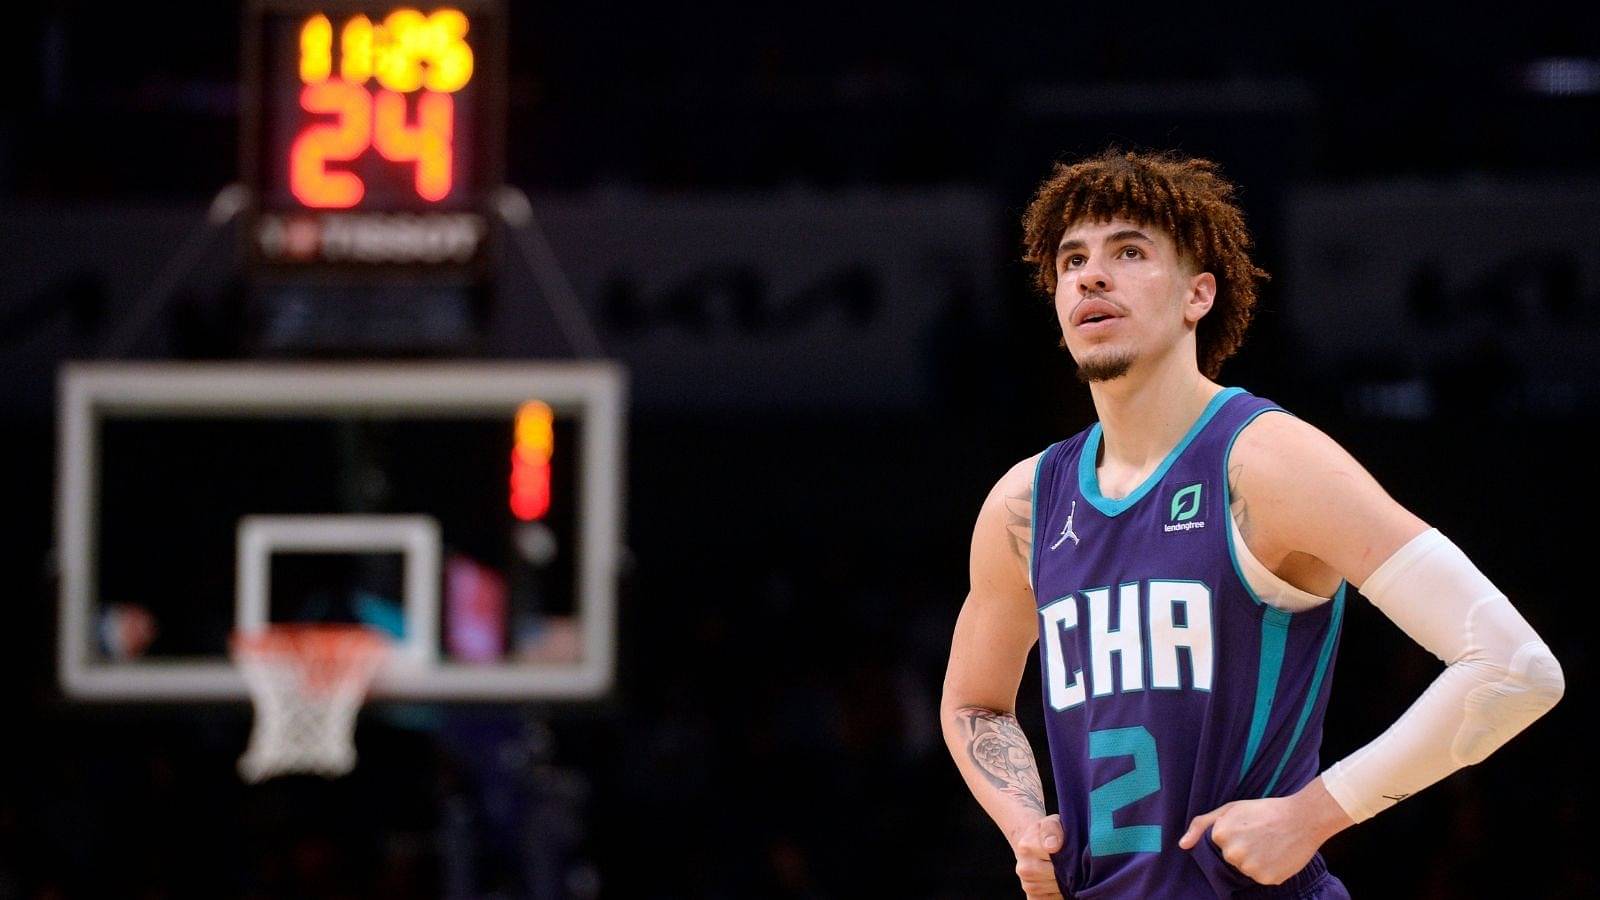 "LaMelo Ball is the 3rd youngest All-Star behind LeBron James and Kobe Bryant": NBA Twitter lauds Hornets point guard for making his first All-Star selection replacing an injured Kevin Durant